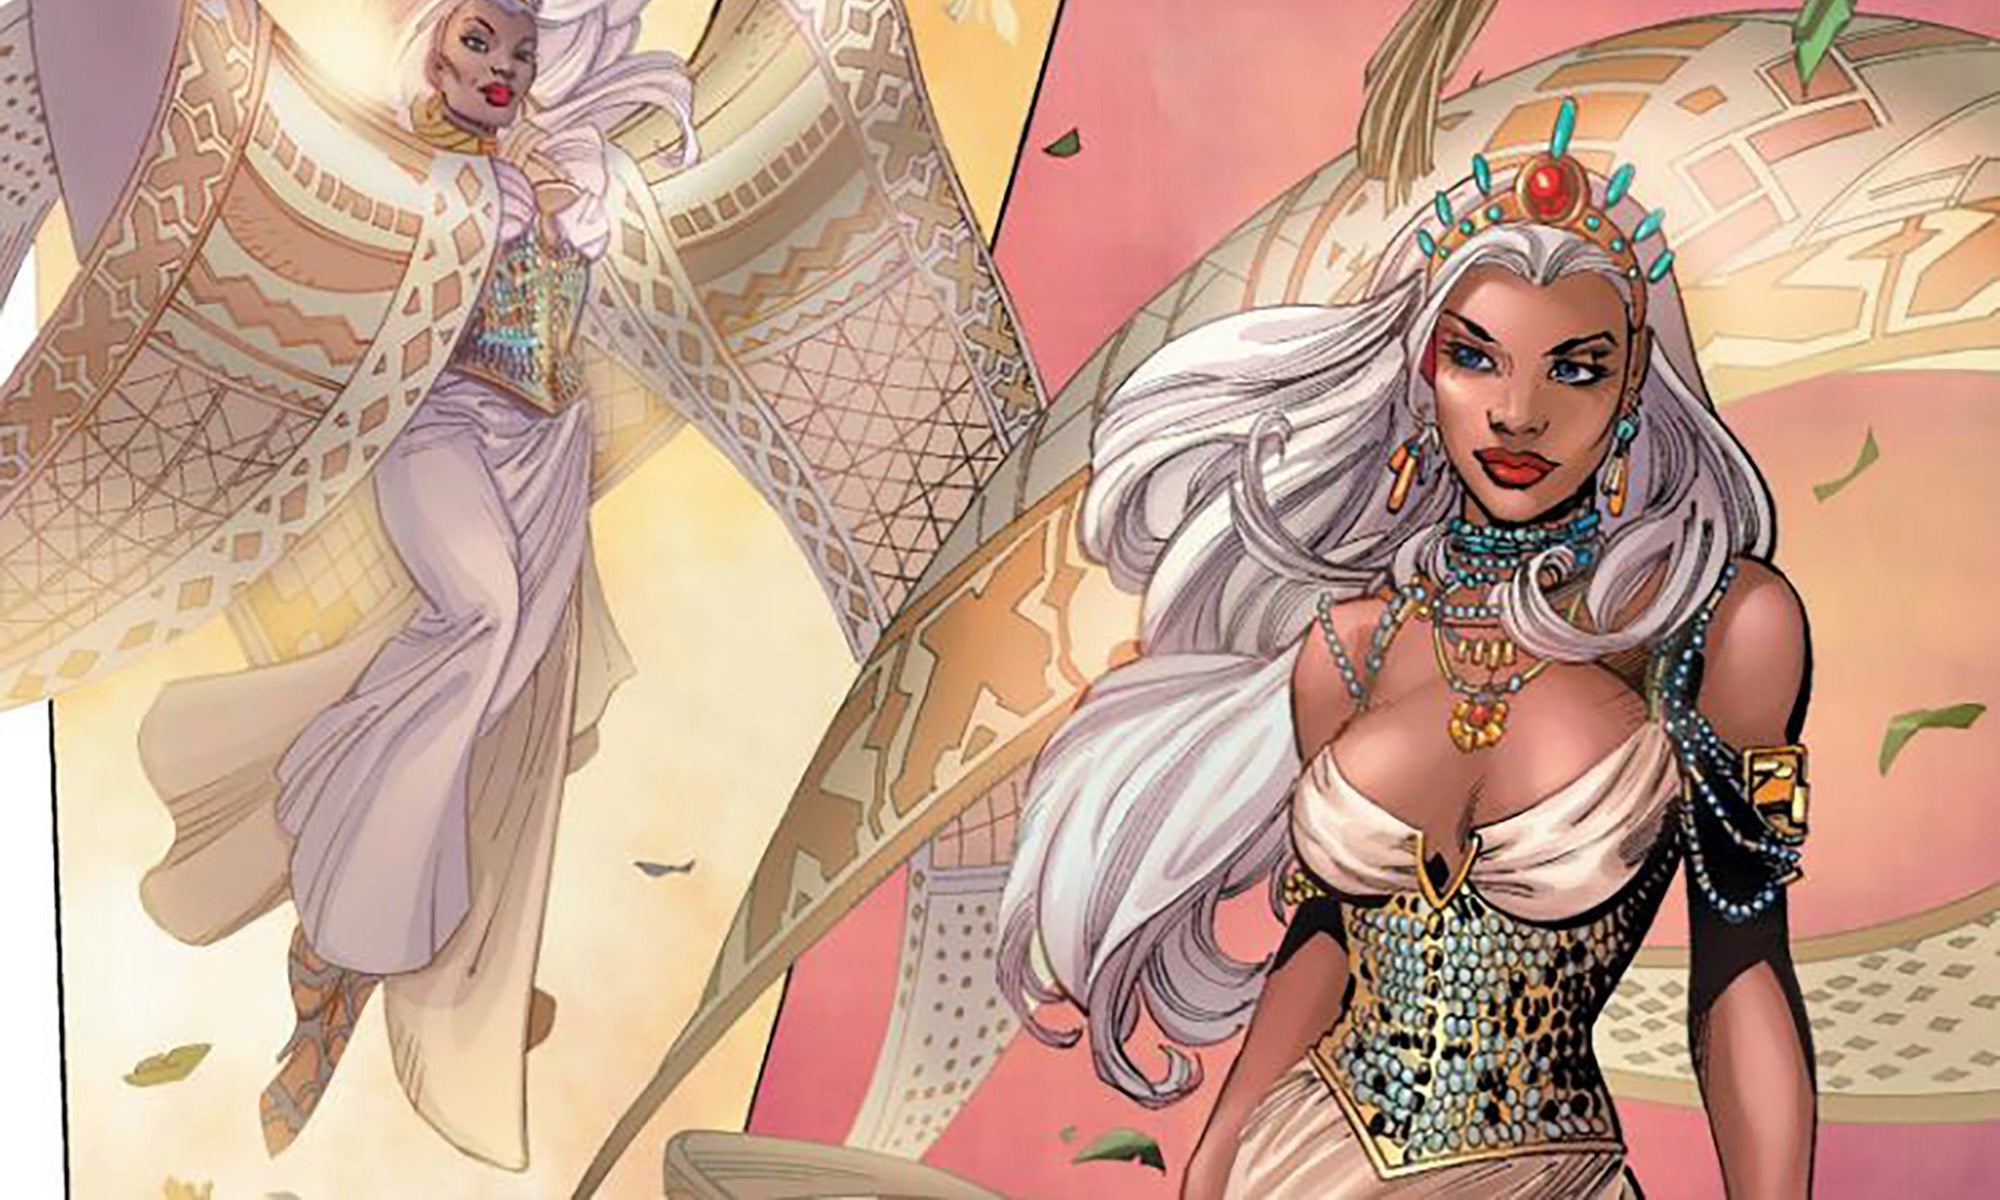 Storm of the X-Men descends from the skies like the goddess she as she arrives at her wedding ceremony.